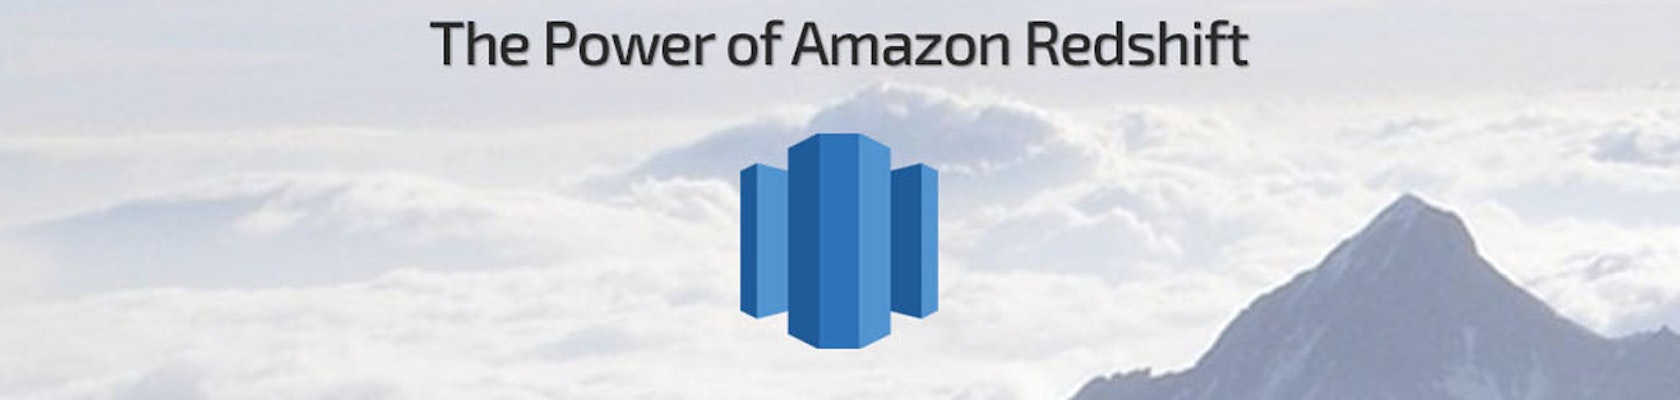 Theme files img the power of amazon redshift